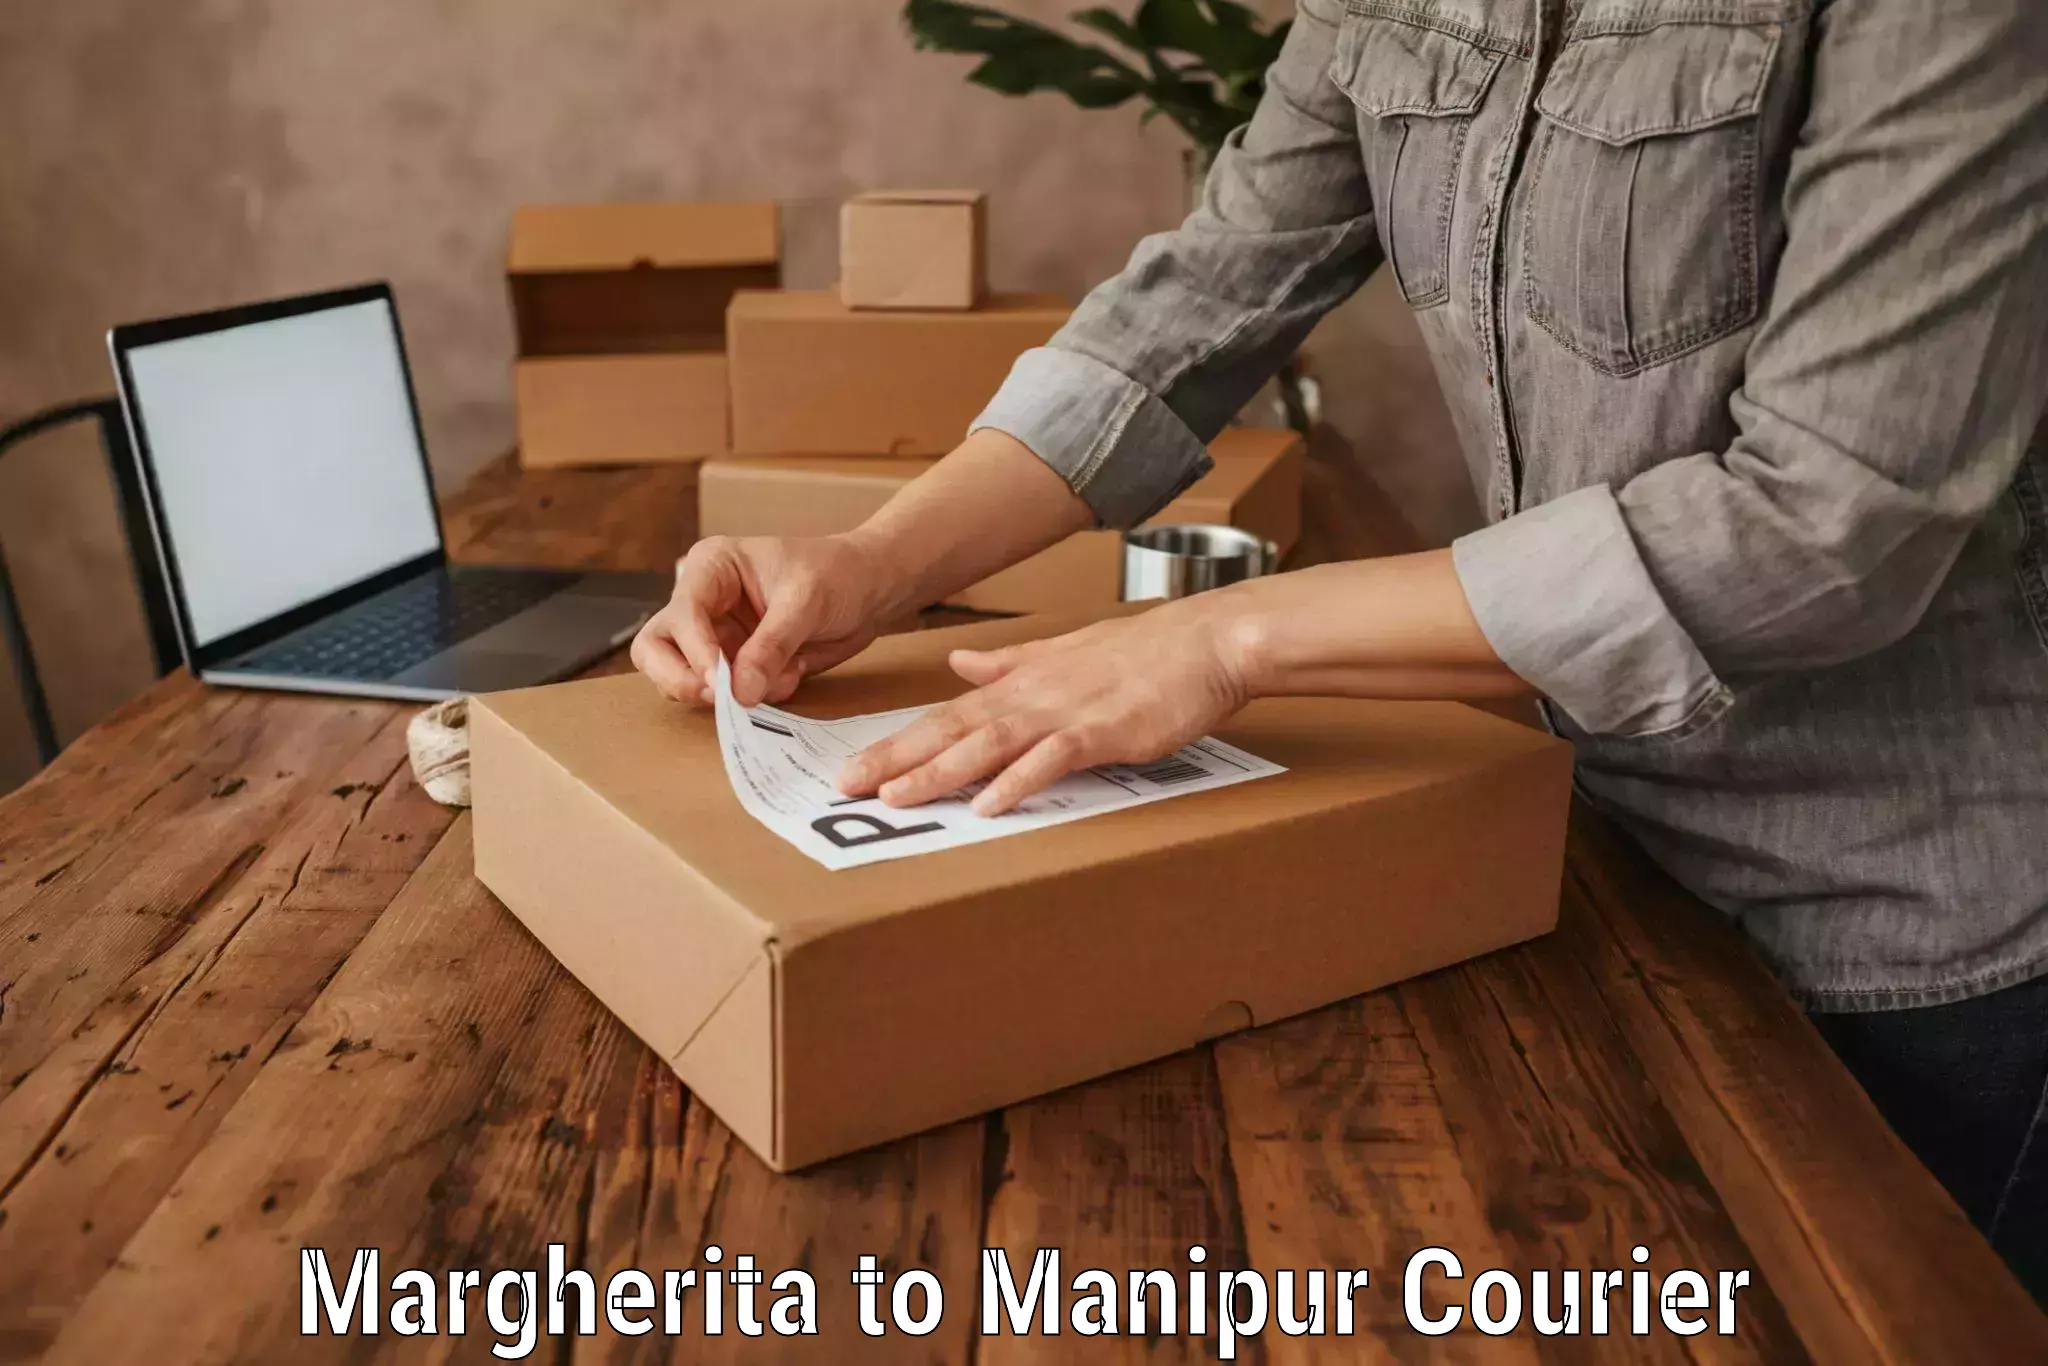 Luggage transport company Margherita to Manipur